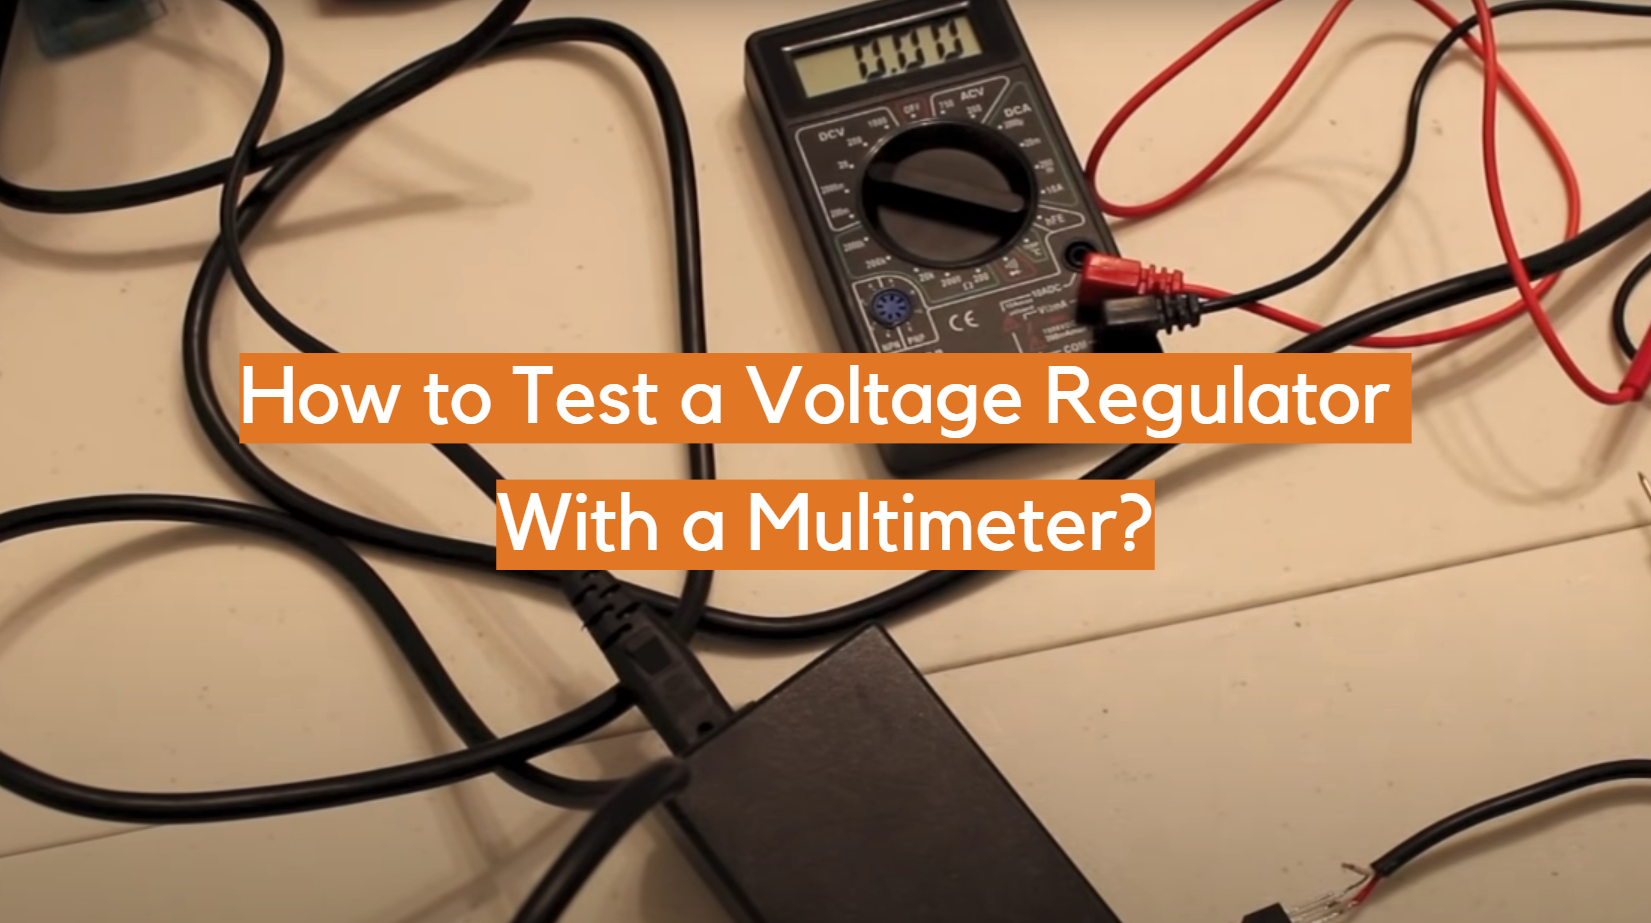 Use a power supply tester or a multimeter to check the voltage outputs of the power supply.
If the readings are significantly off or unstable, consider replacing the power supply.